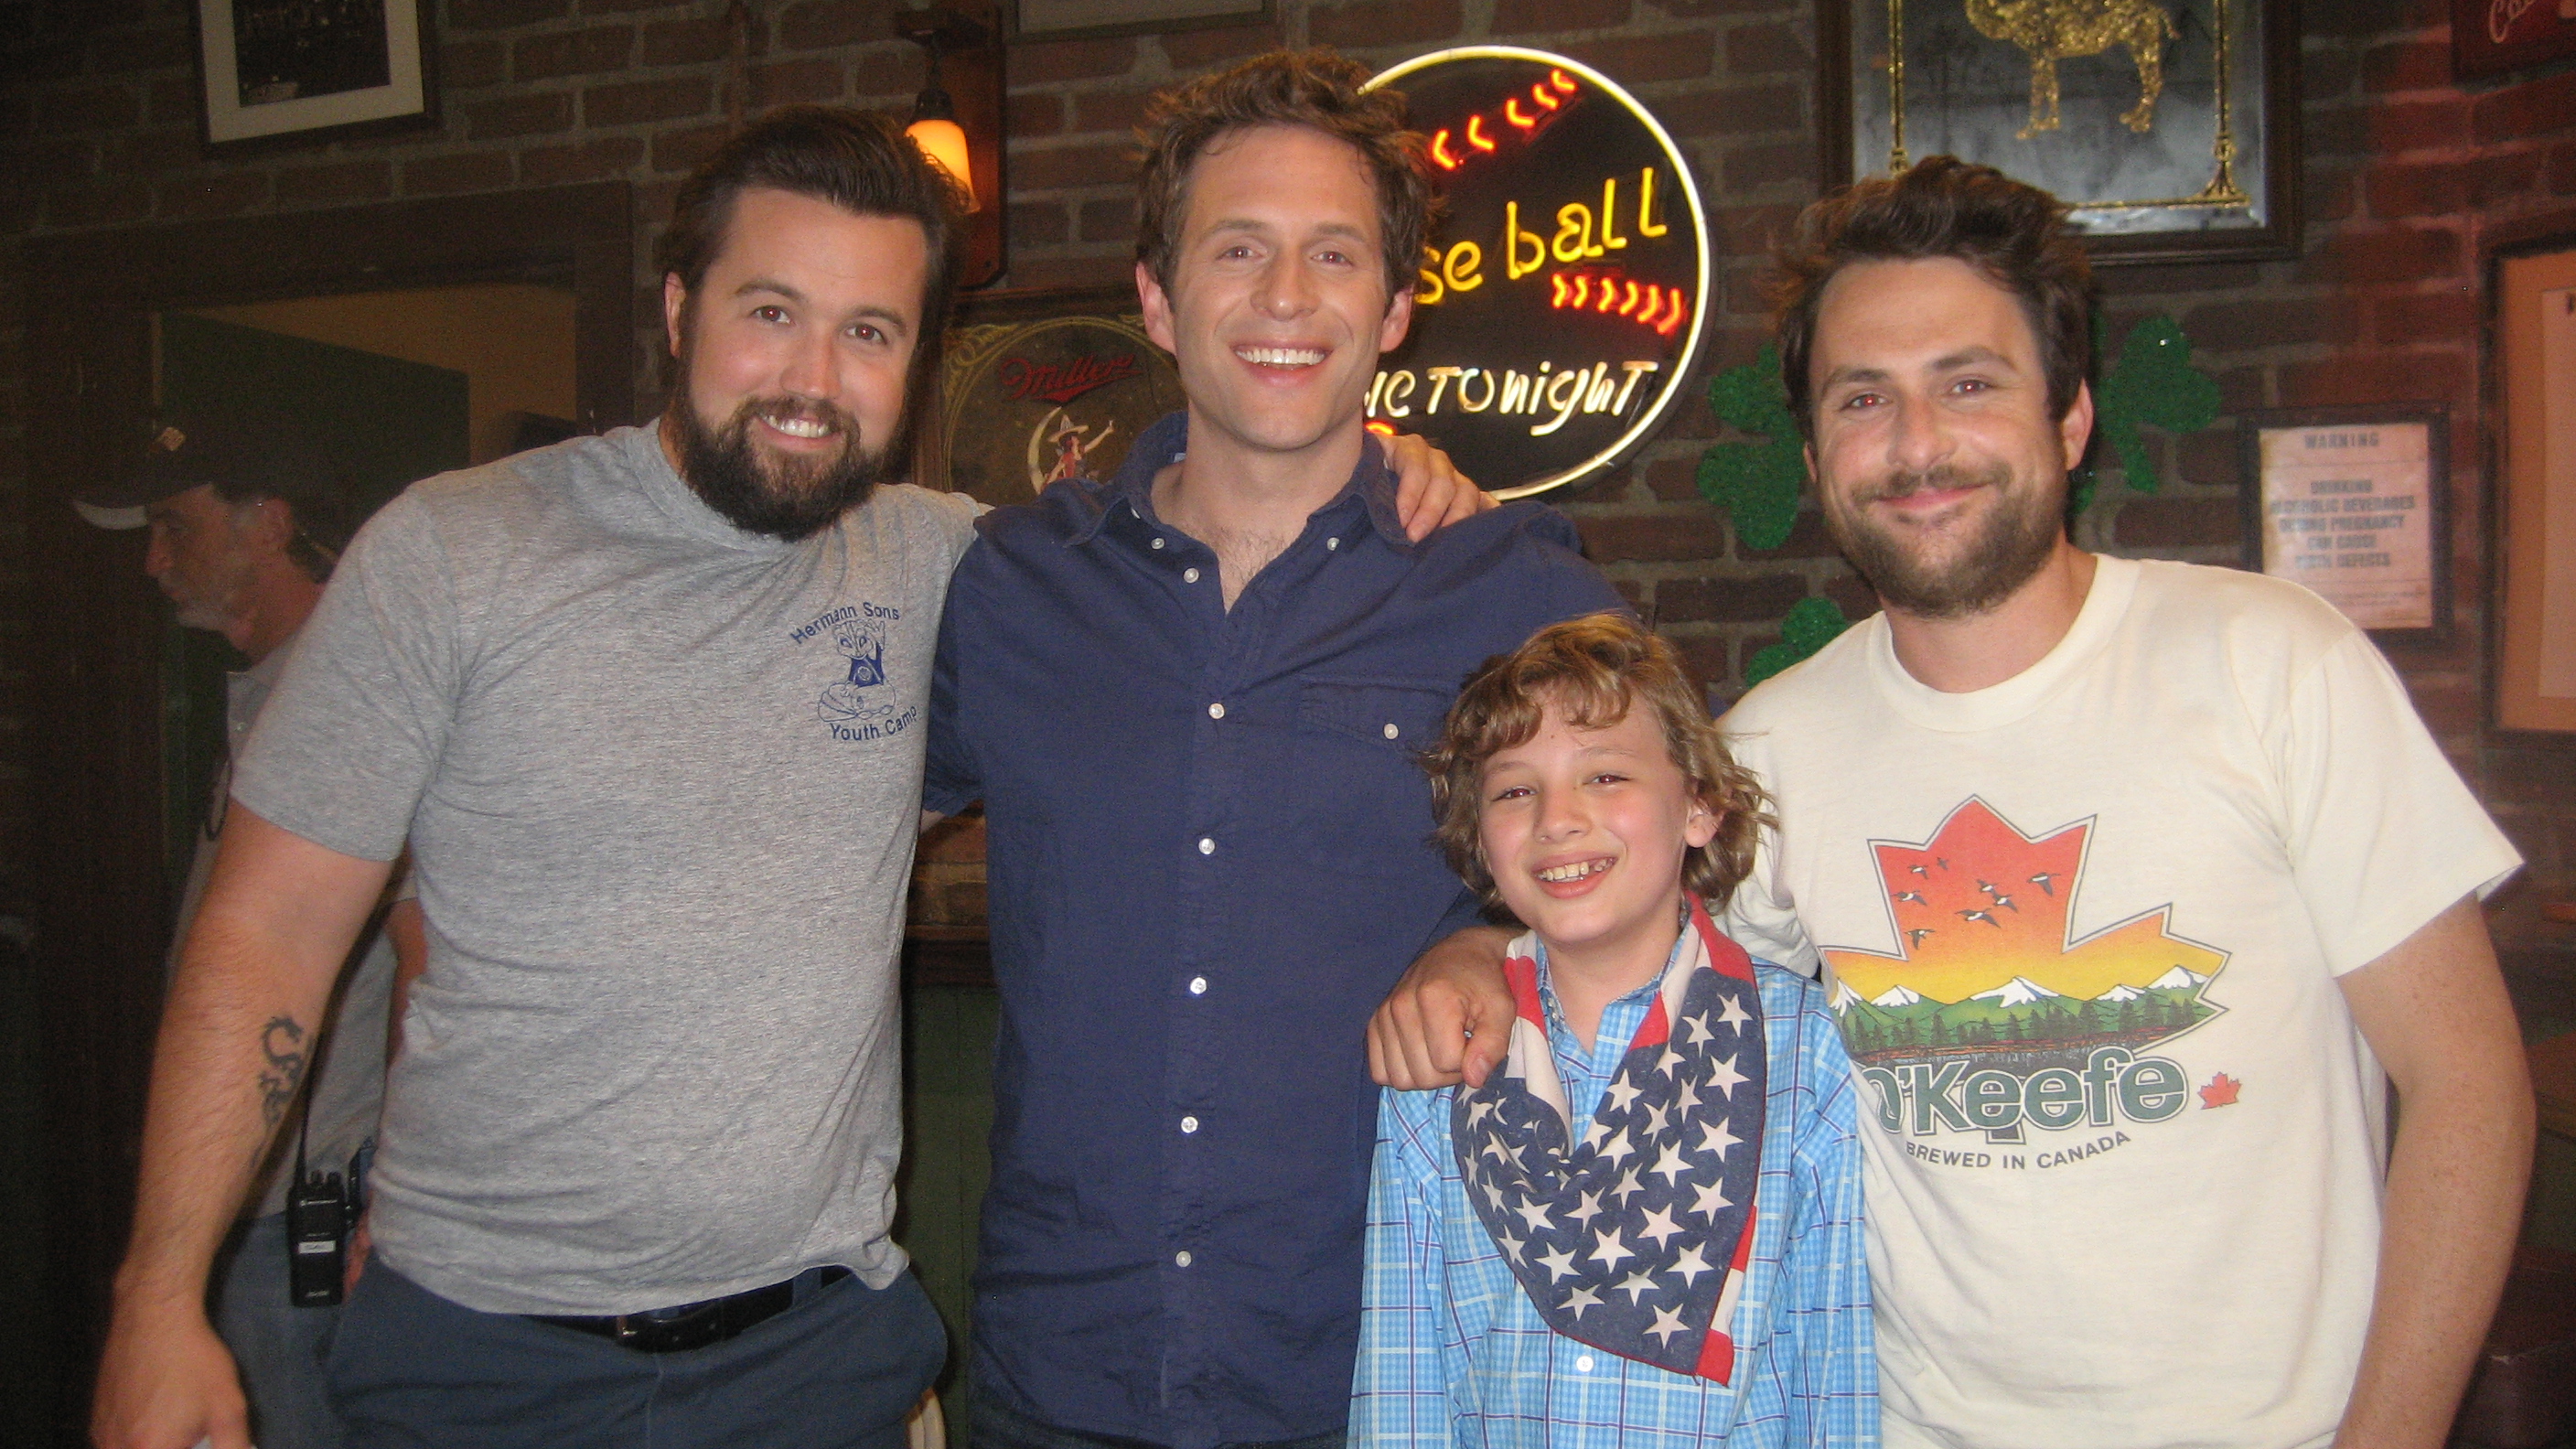 Maxim with Rob McElhenney, Glenn Howerton and Charlie Day on the set of 